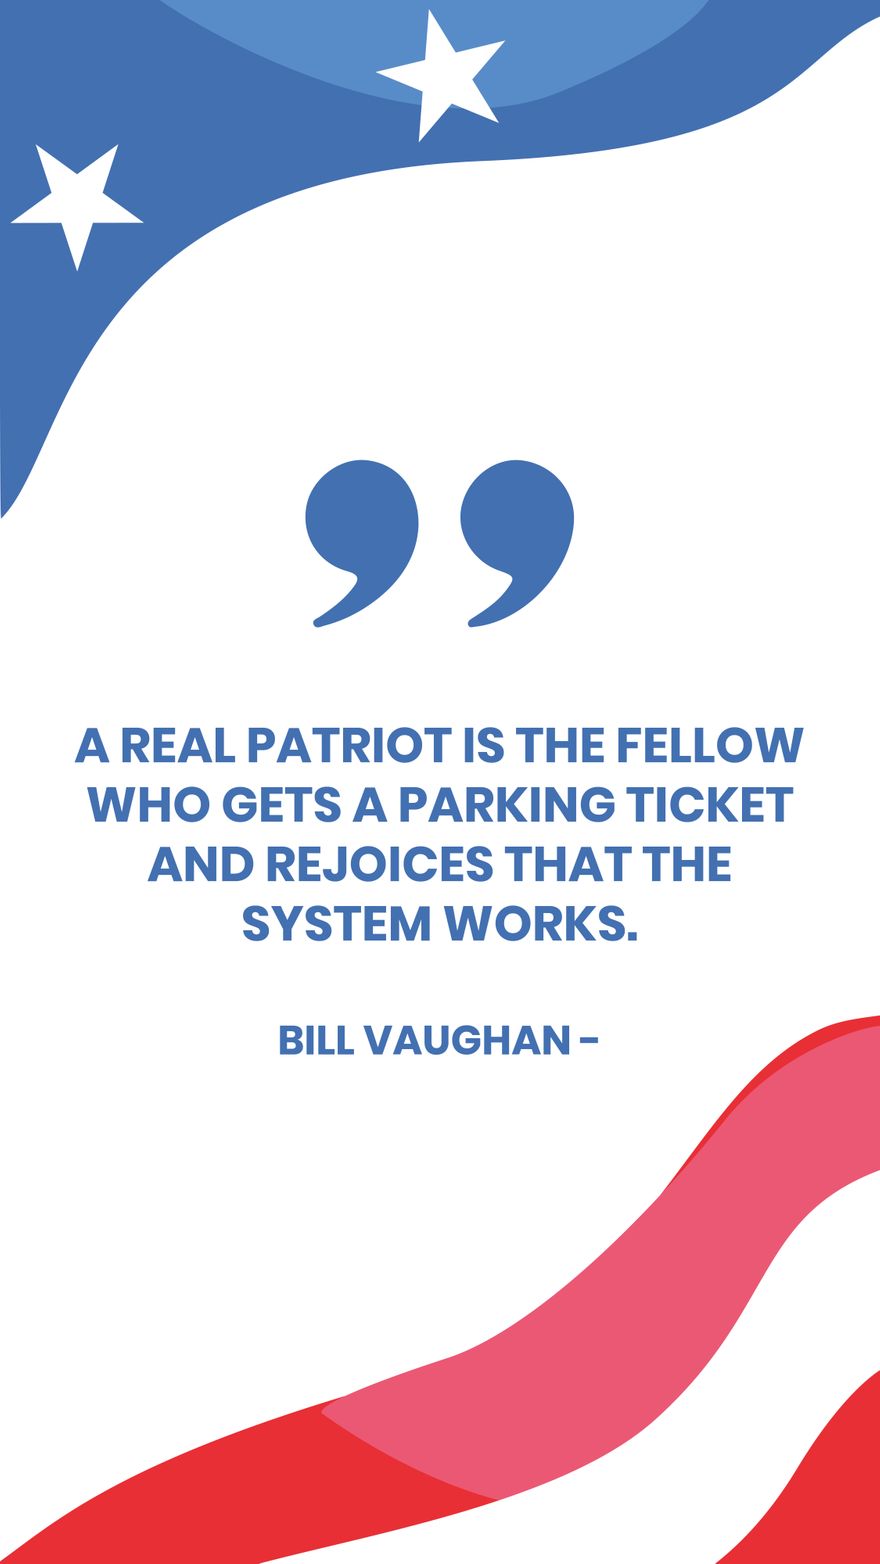 Bill Vaughan - A real patriot is the fellow who gets a parking ticket and rejoices that the system works.